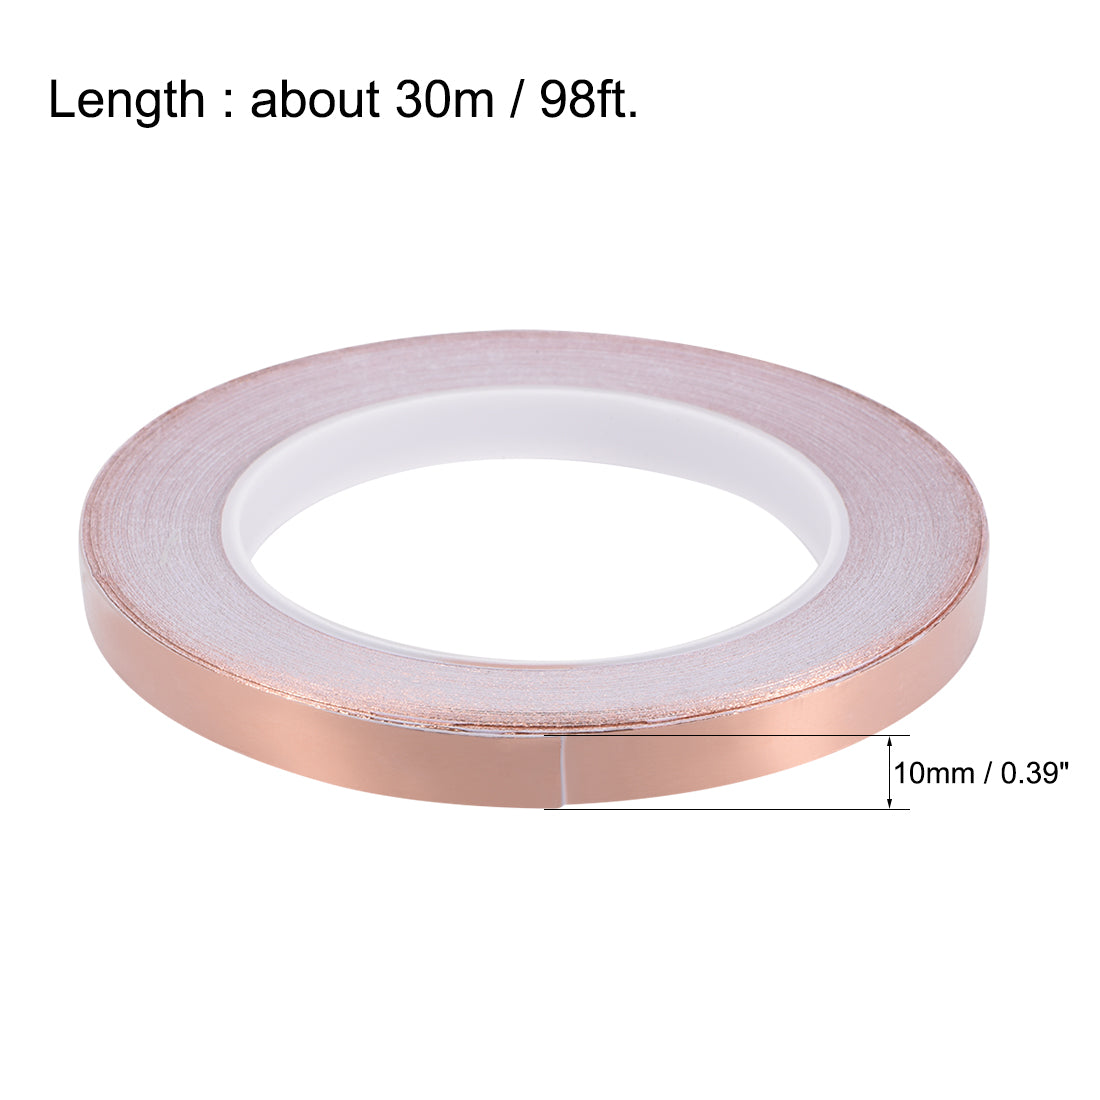 uxcell Uxcell Single-sided Conductive Tape Copper Foil Tape 10mm x 30m(98ft) for EMI Shielding, Stained Glass, Electrical Repairs